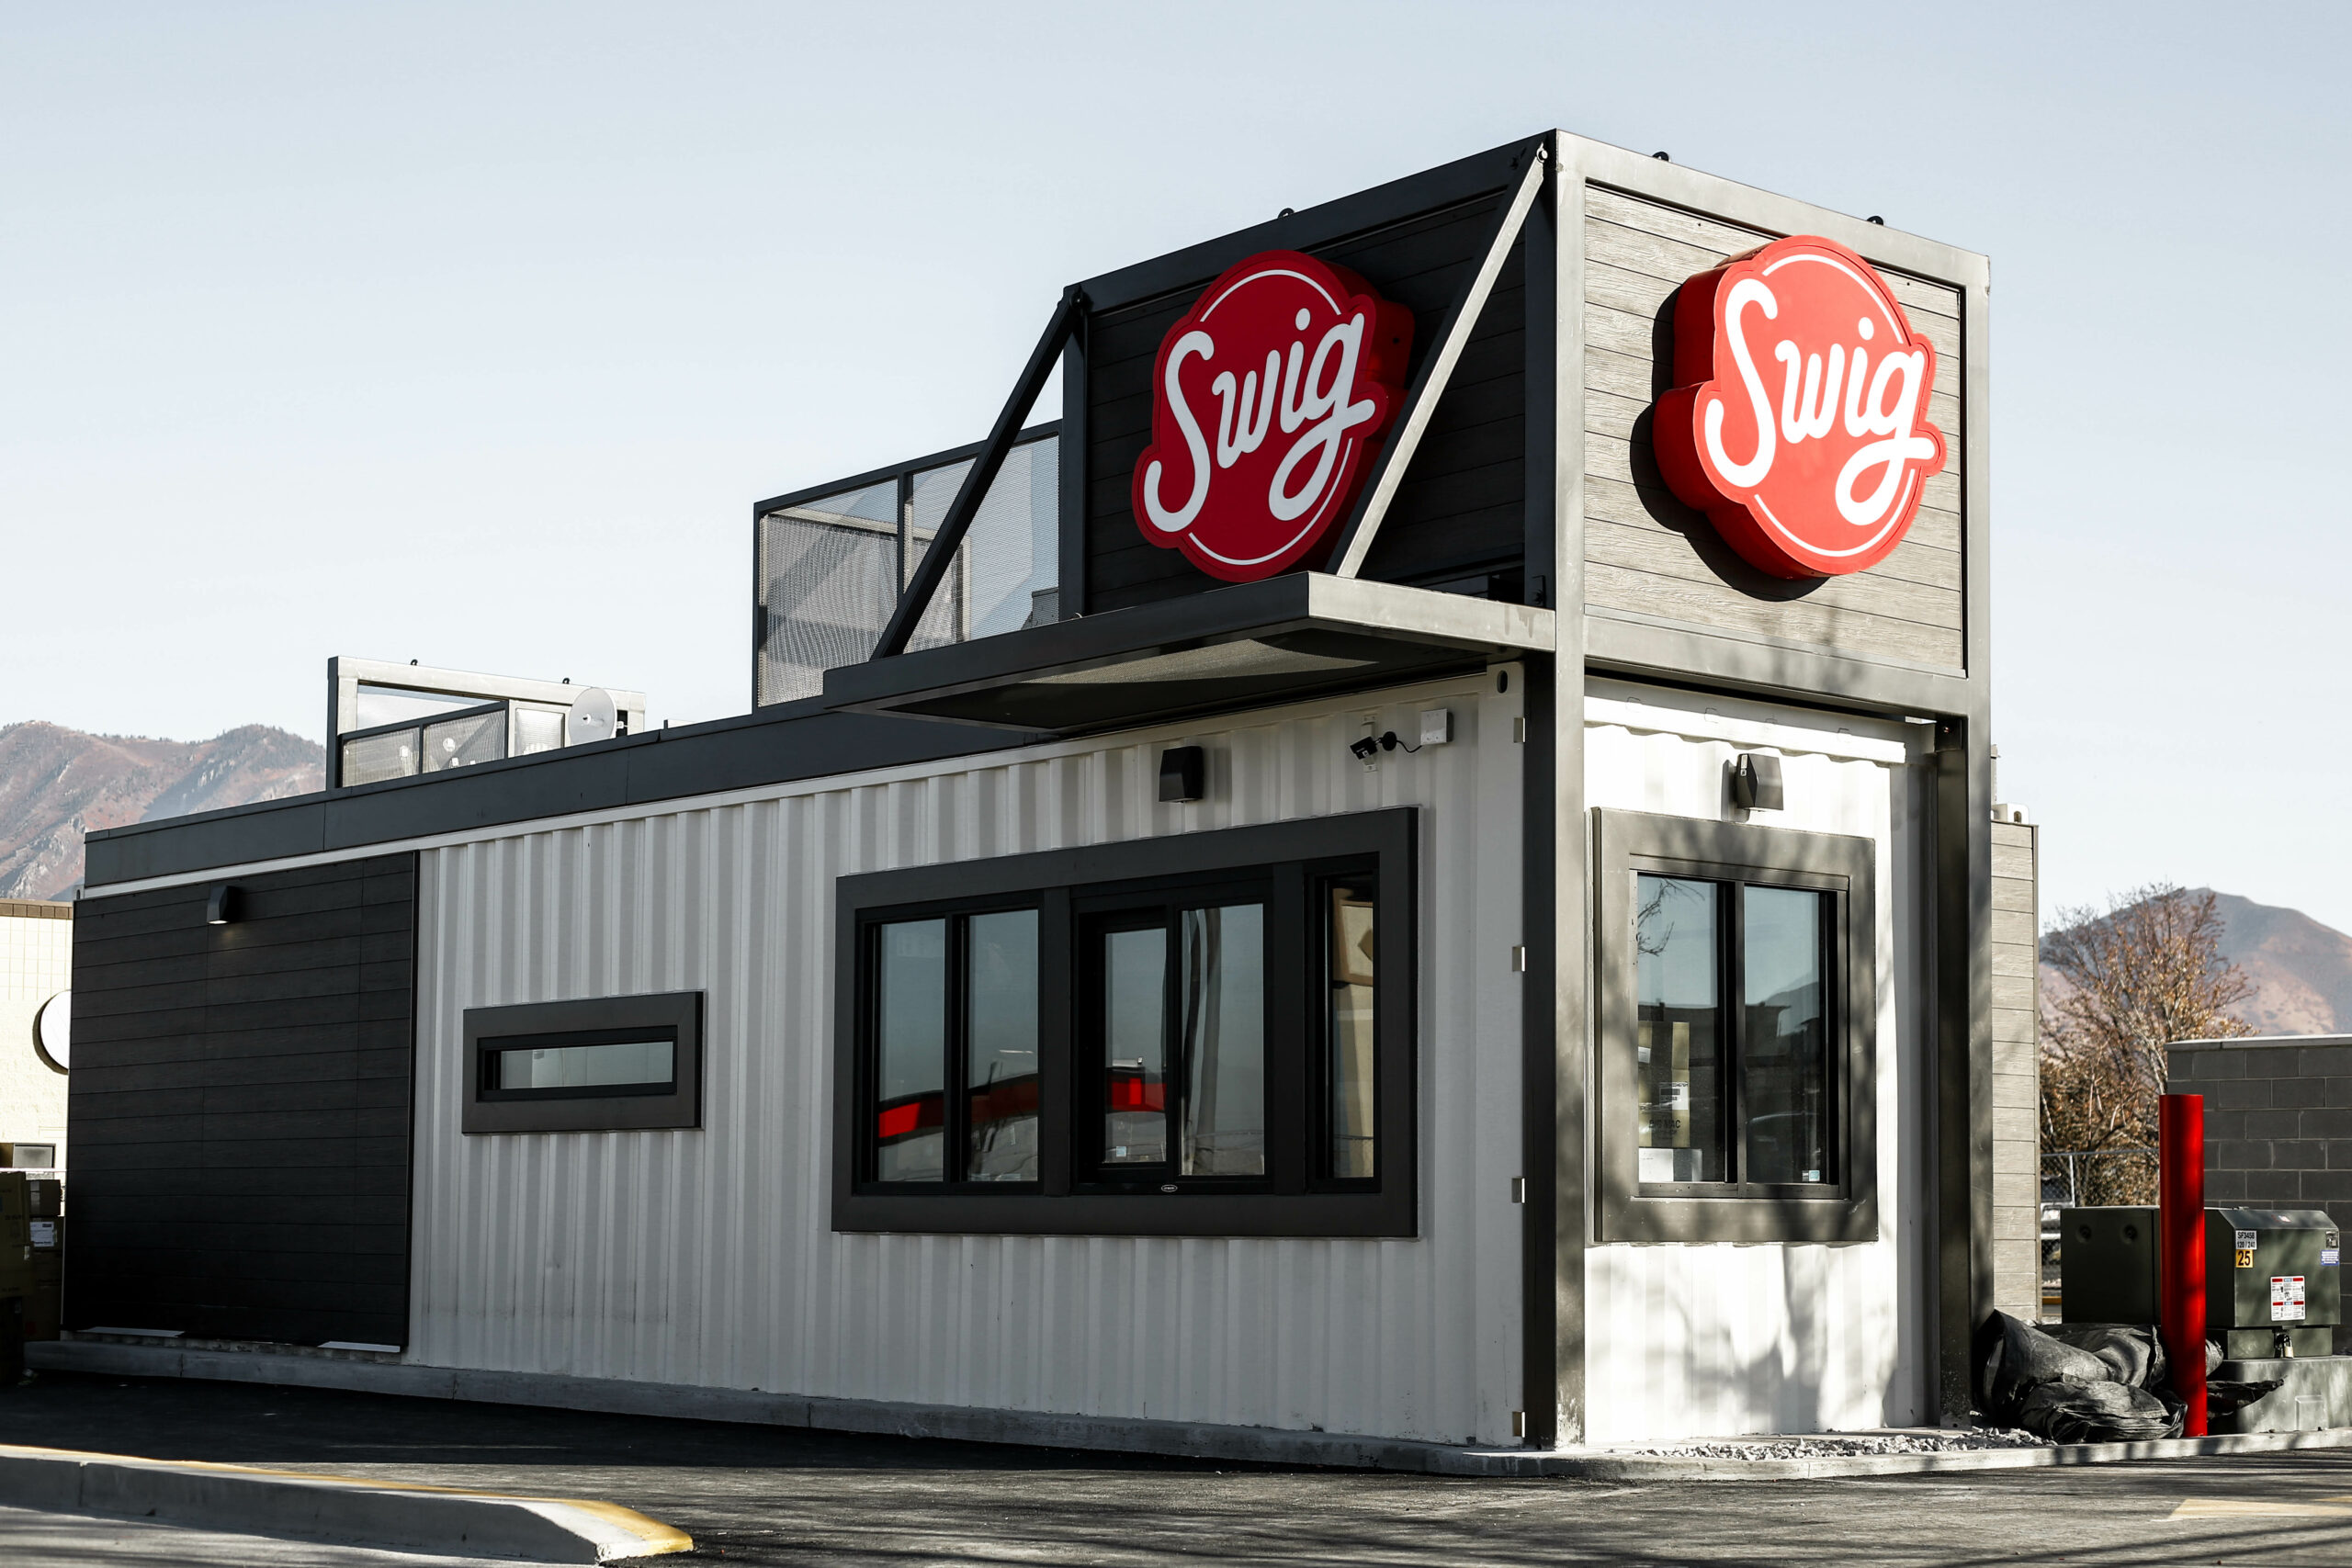 In this edition of the Founder Series, Nicole Tanner shares how she founded Swig, one of the biggest (and most well known) Utah soda shops.